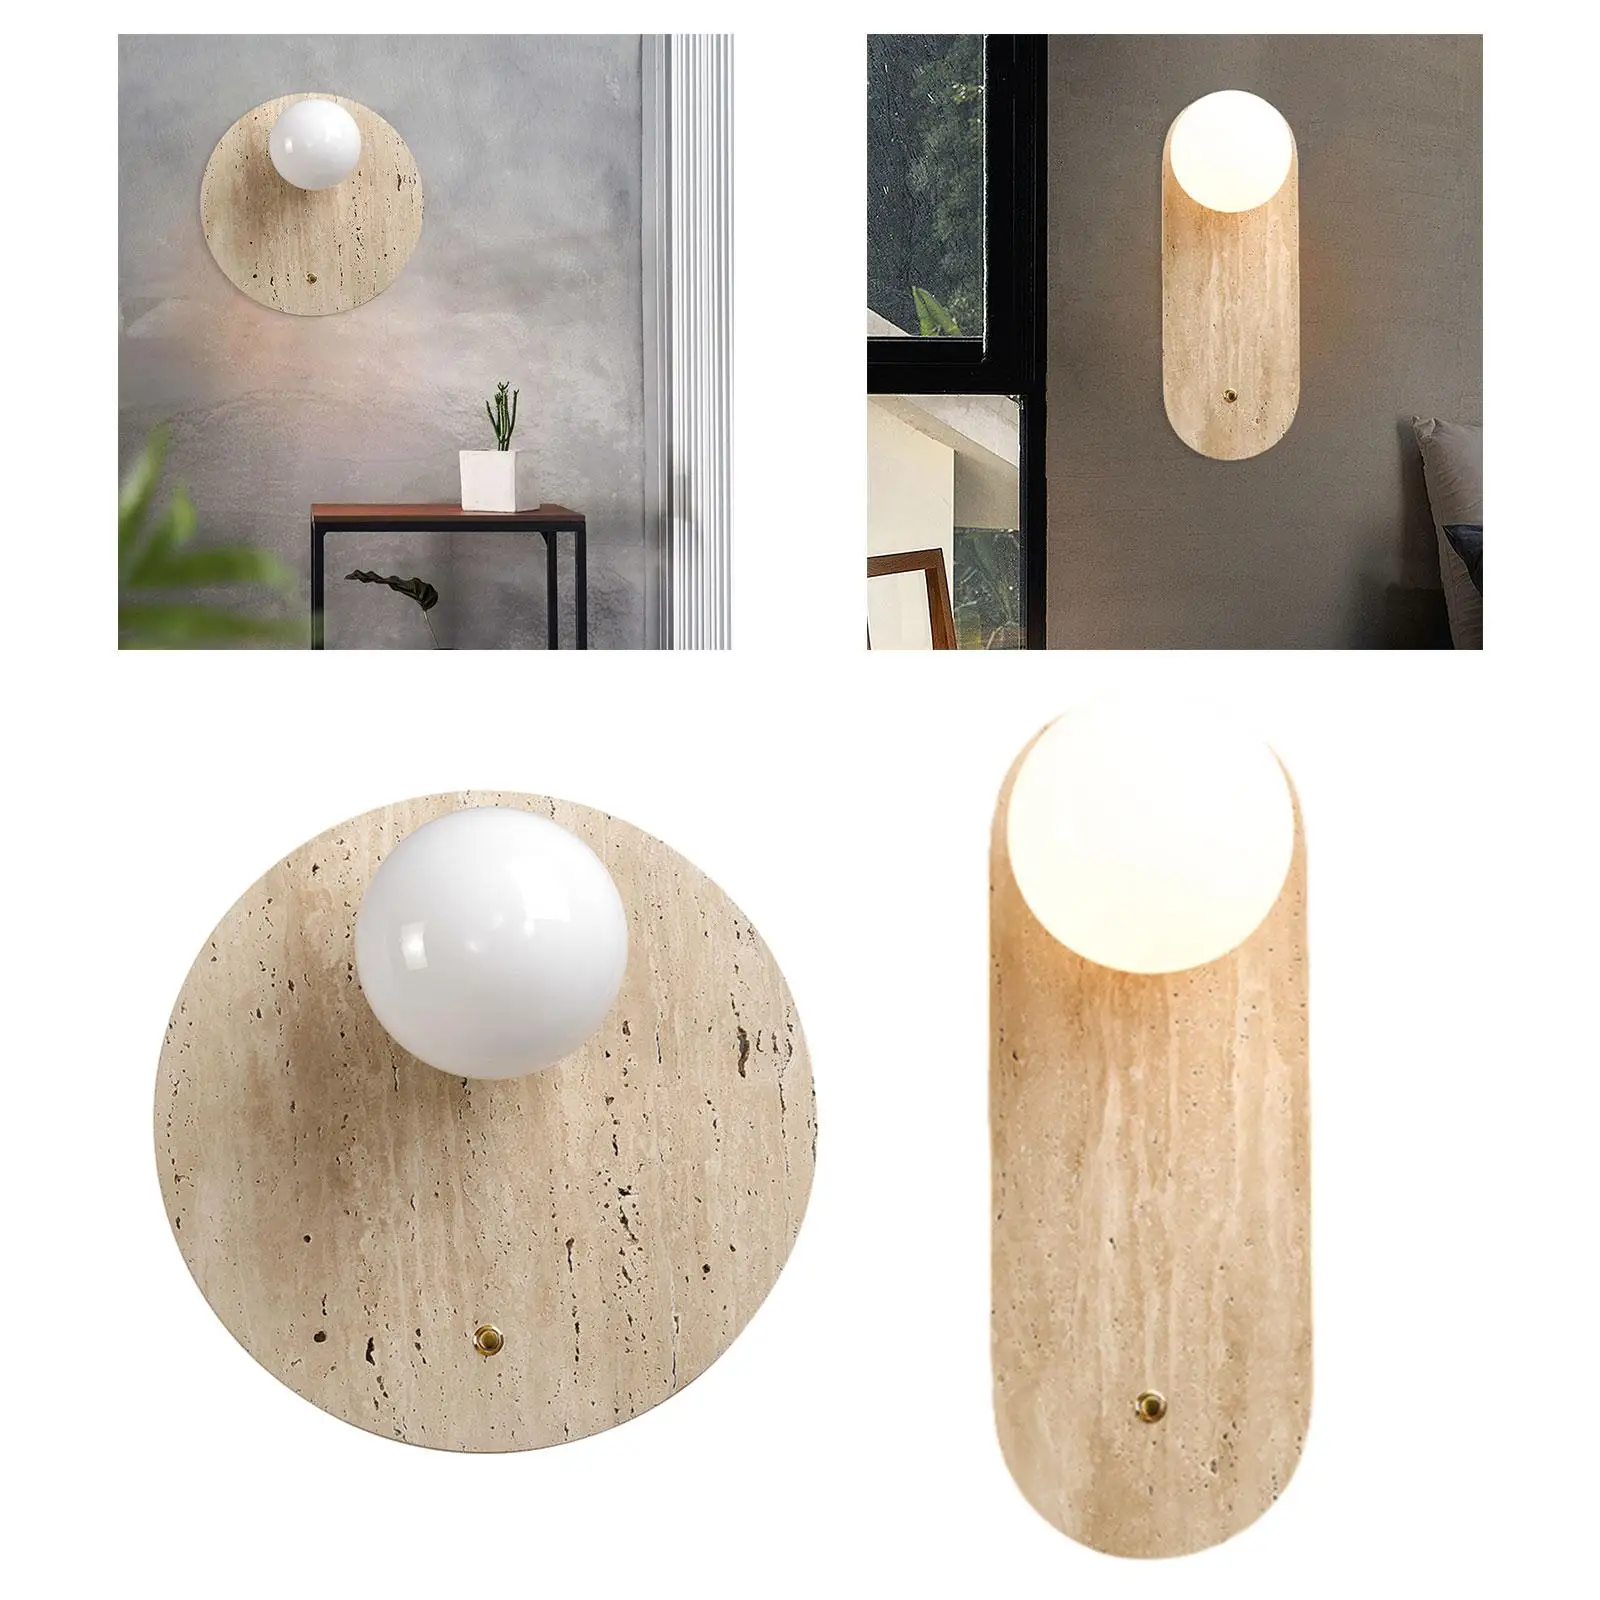 Japanese Bulb Not Included Wall Mounted Lamp for Hallway Indoor Office